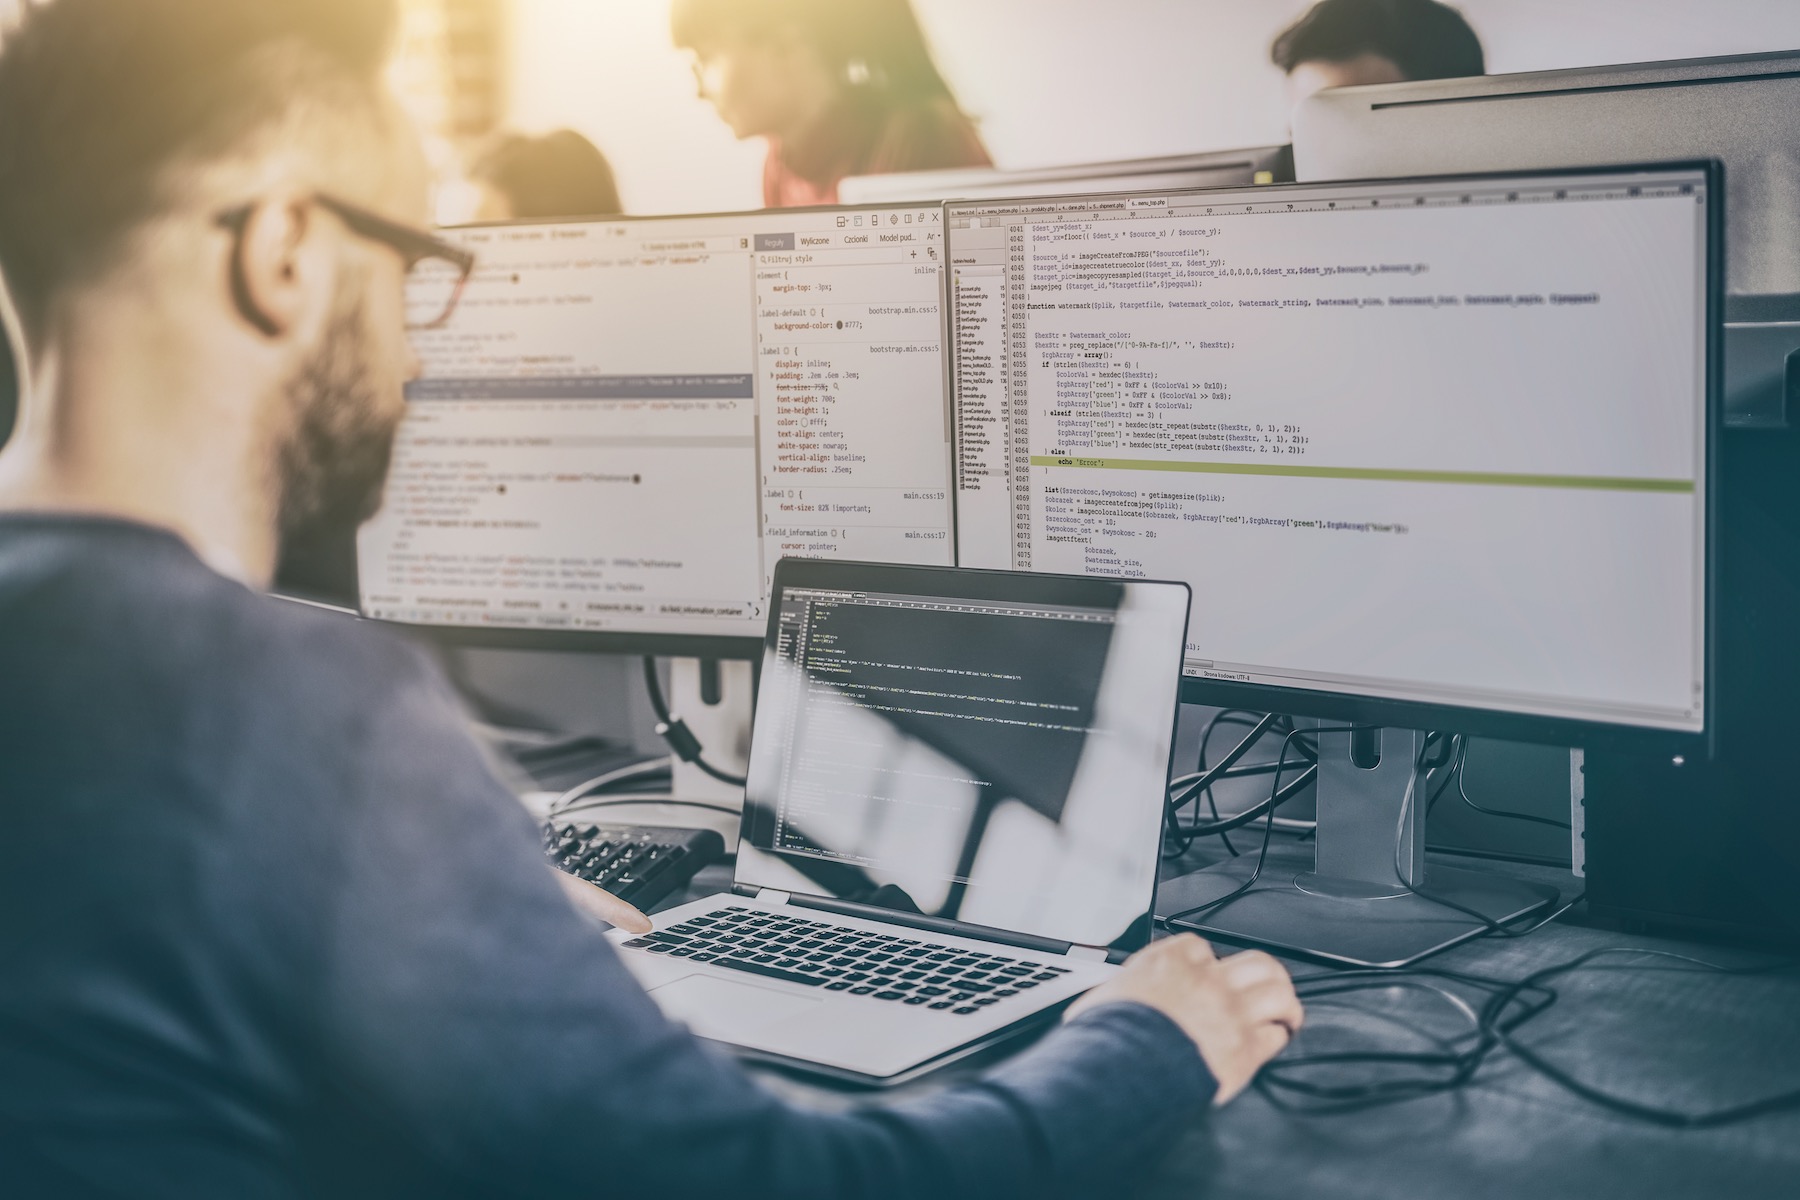 5 Tips to Help Advance Your Software Engineering Career